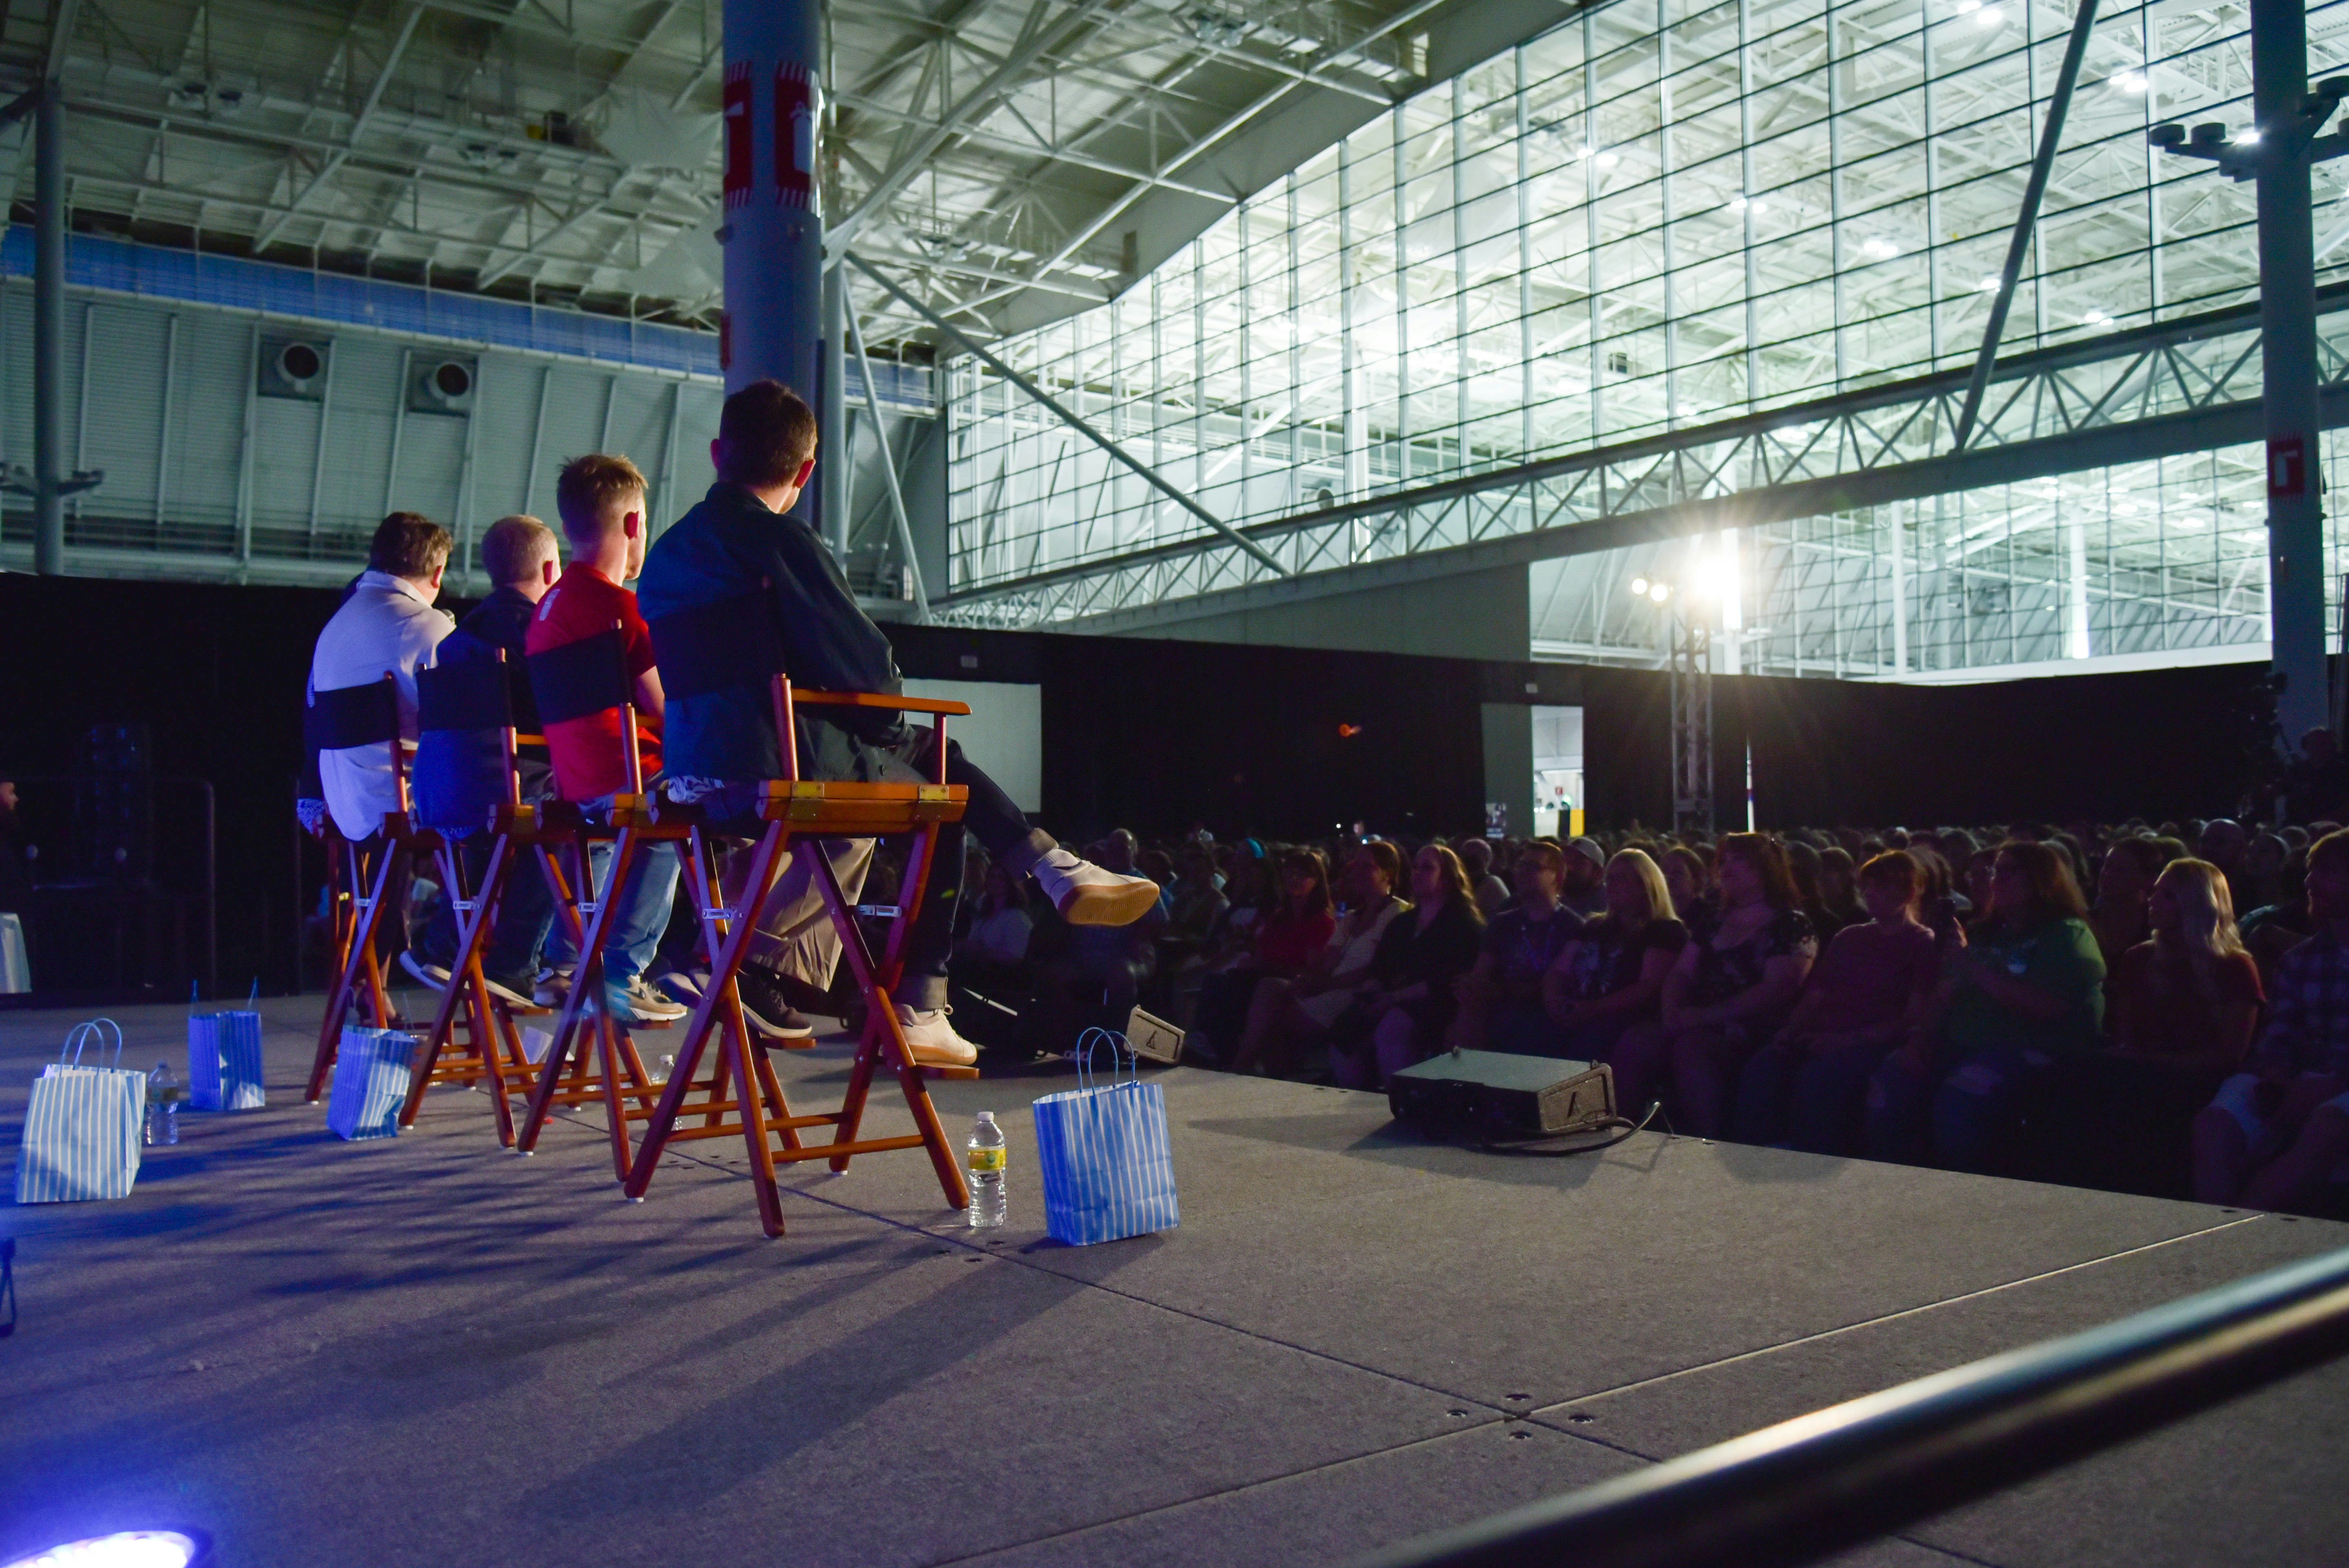 A shot of the four Hobbits (Elijah Wood, Dominic Monaghan, Billy Boyd, and Sean Astin) seated at their panel, overlooking the crowd.